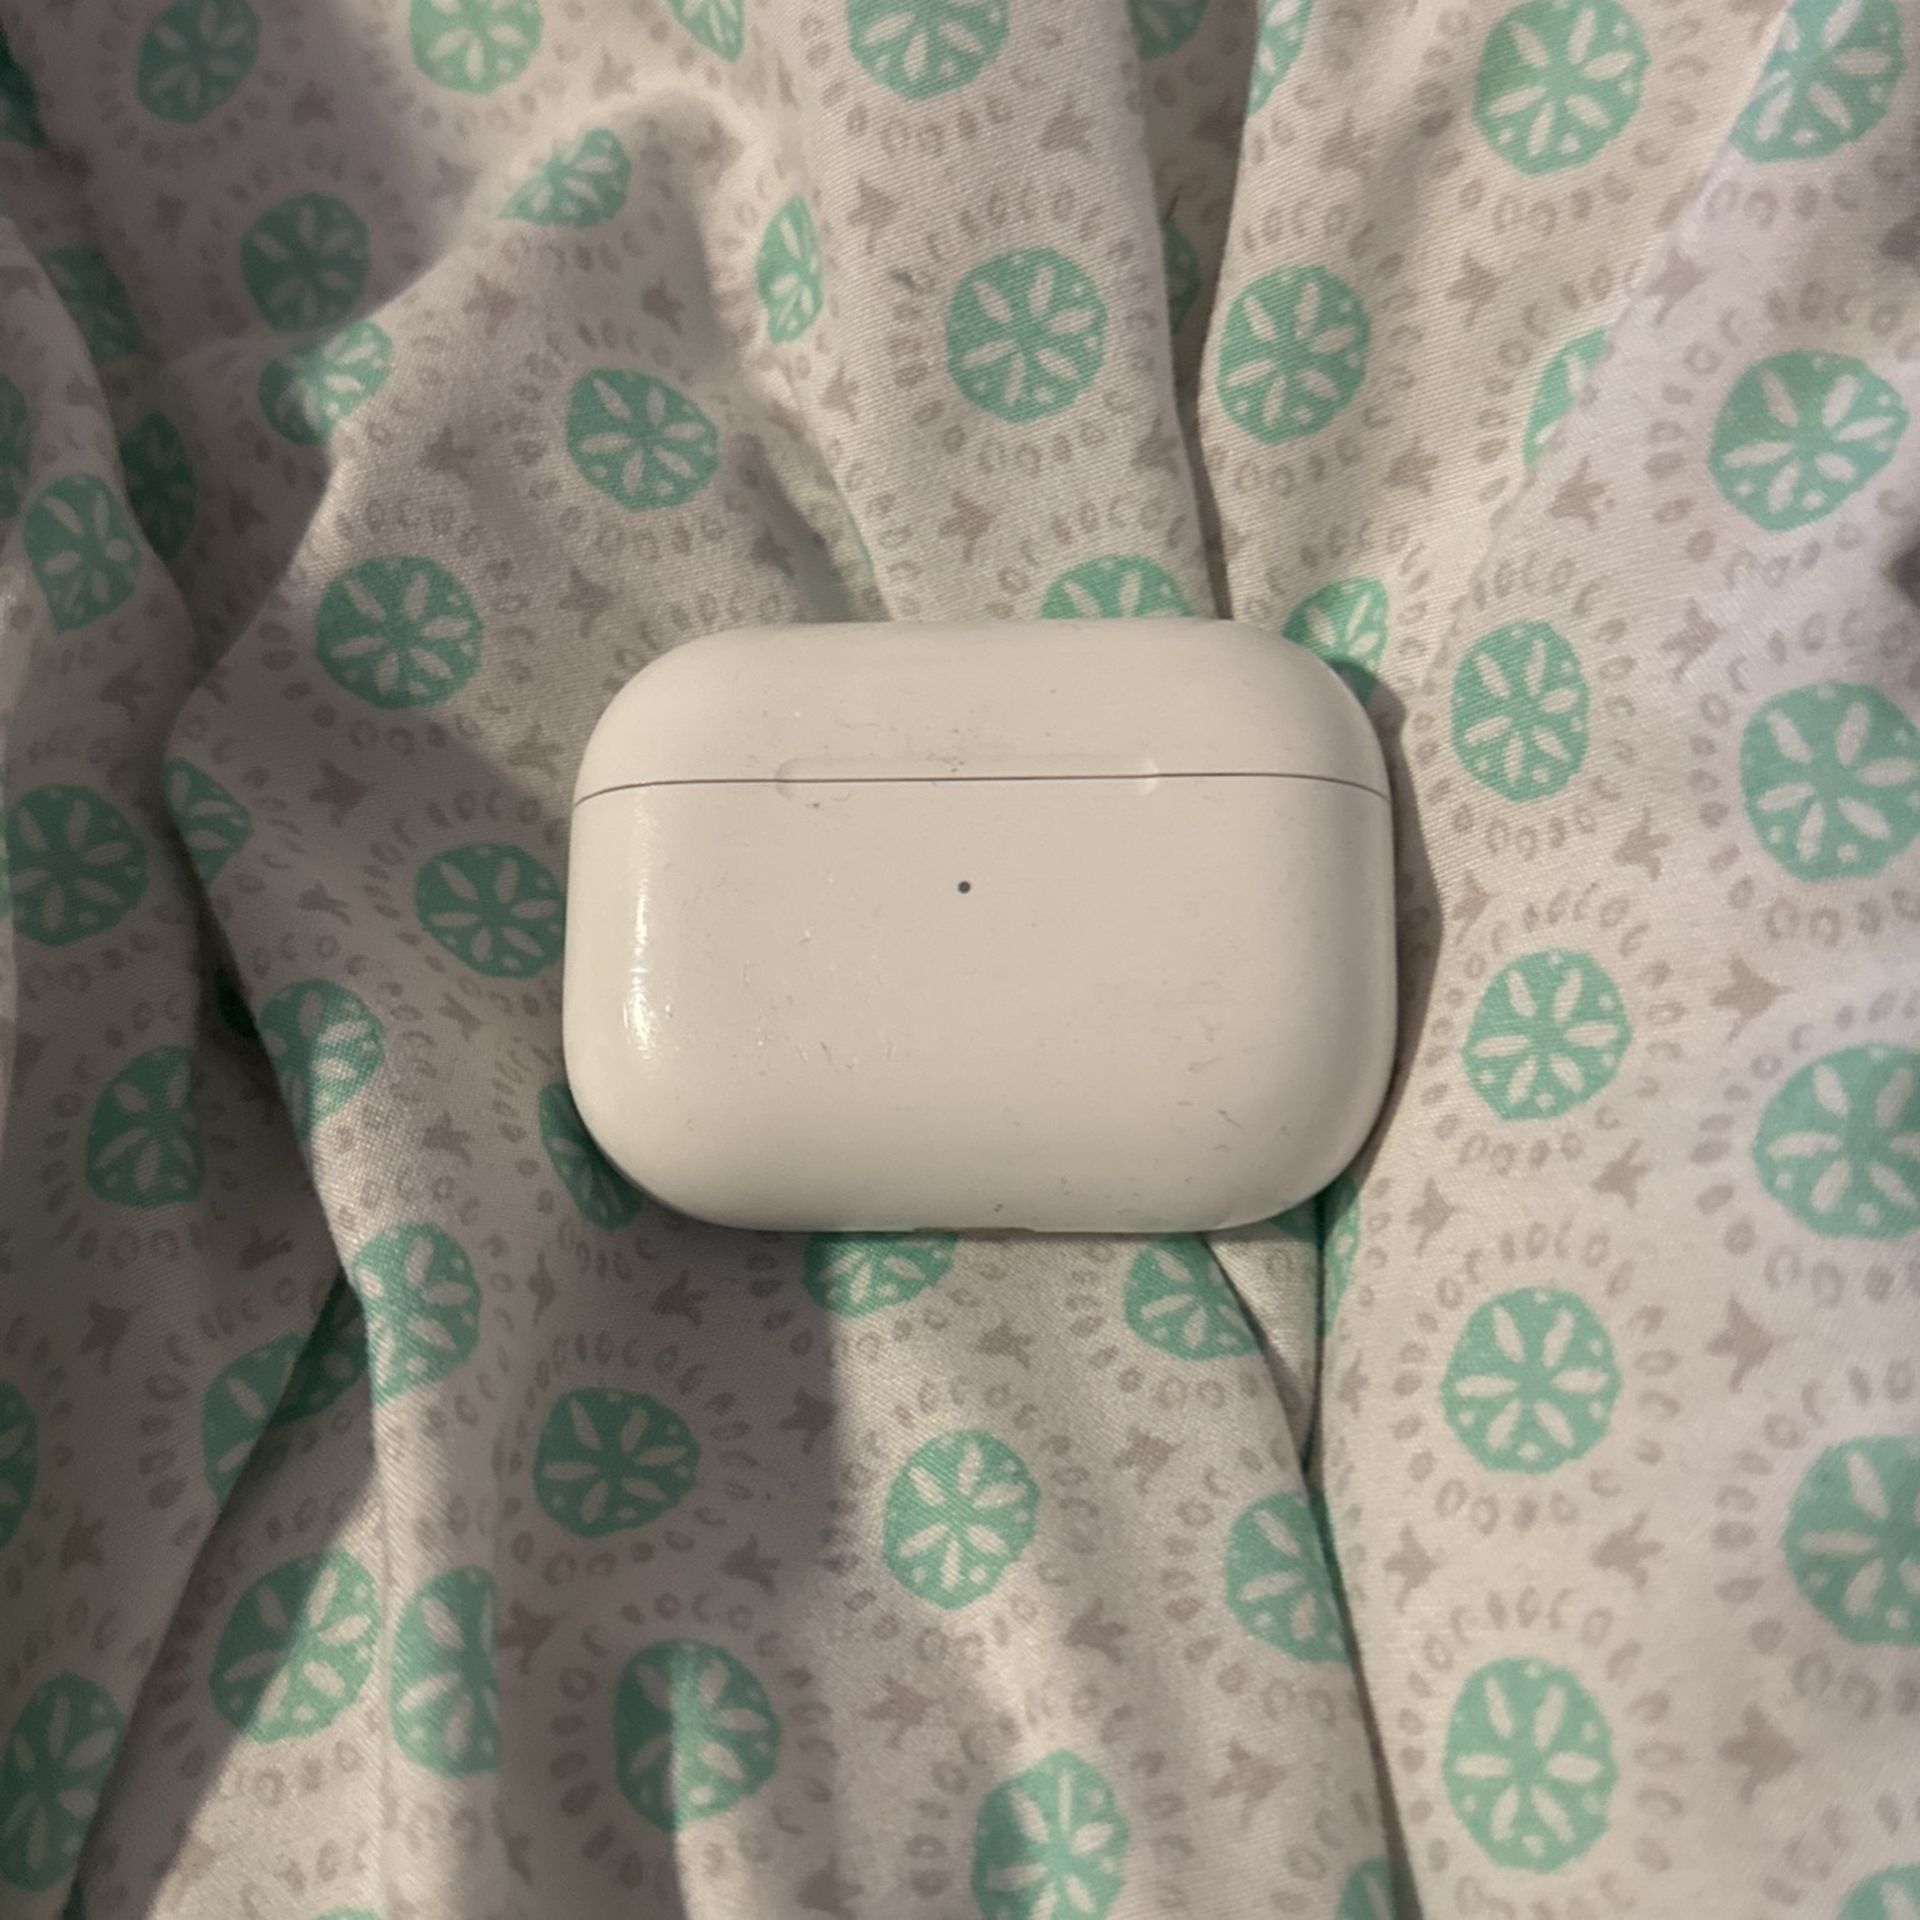 AirPod Pro Case With 1 AirPod 